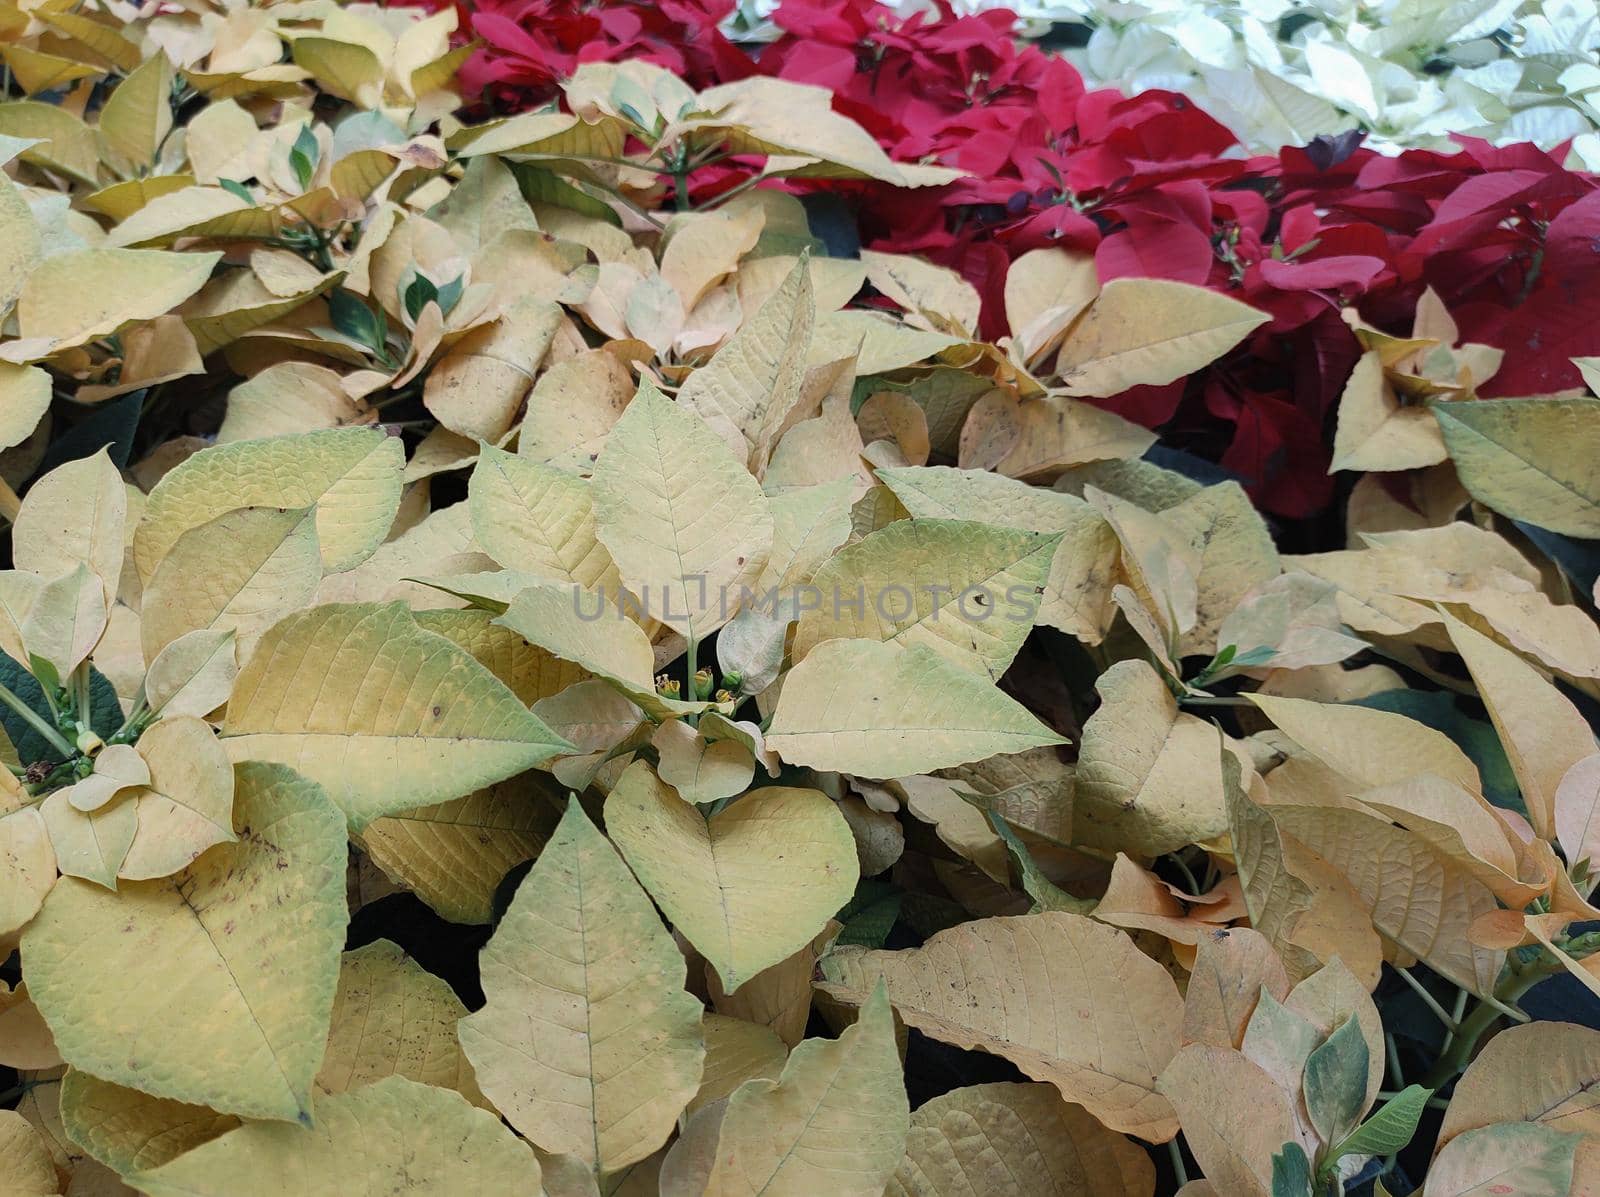 Top view of garden bed lined with yellow poinsettias. by silviopl